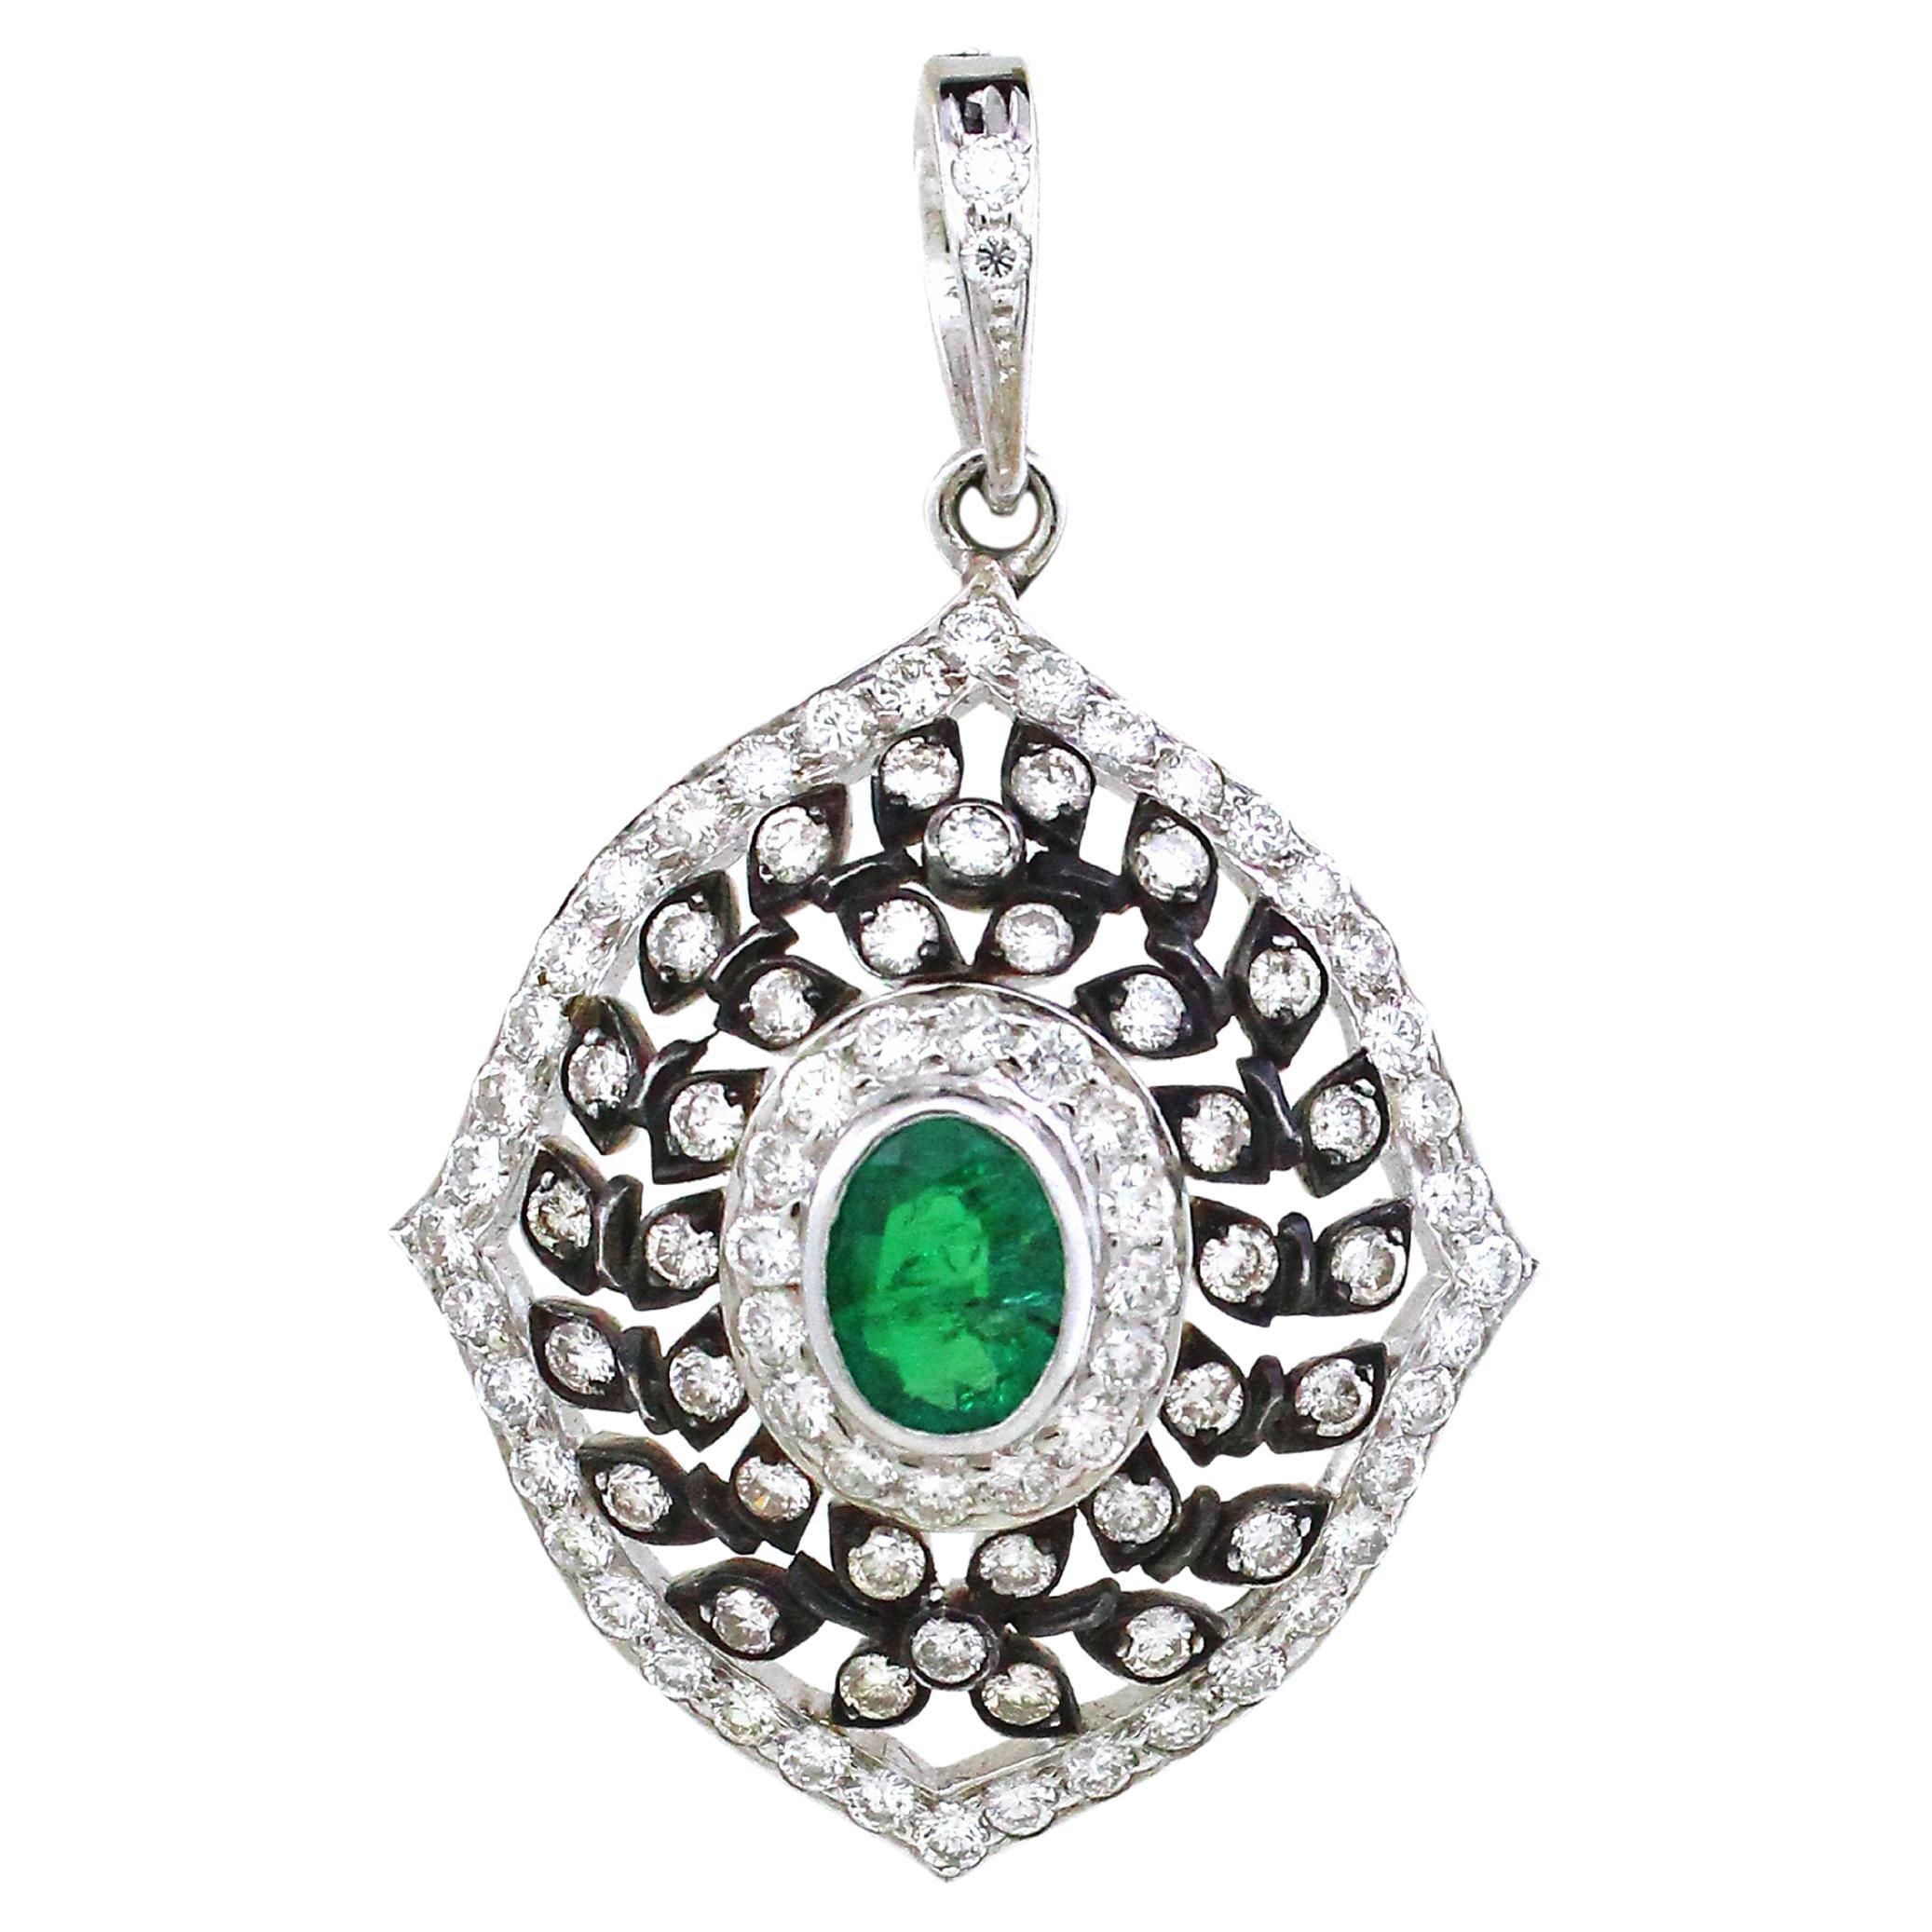 1.5 carats of emerald Pendant For Sale